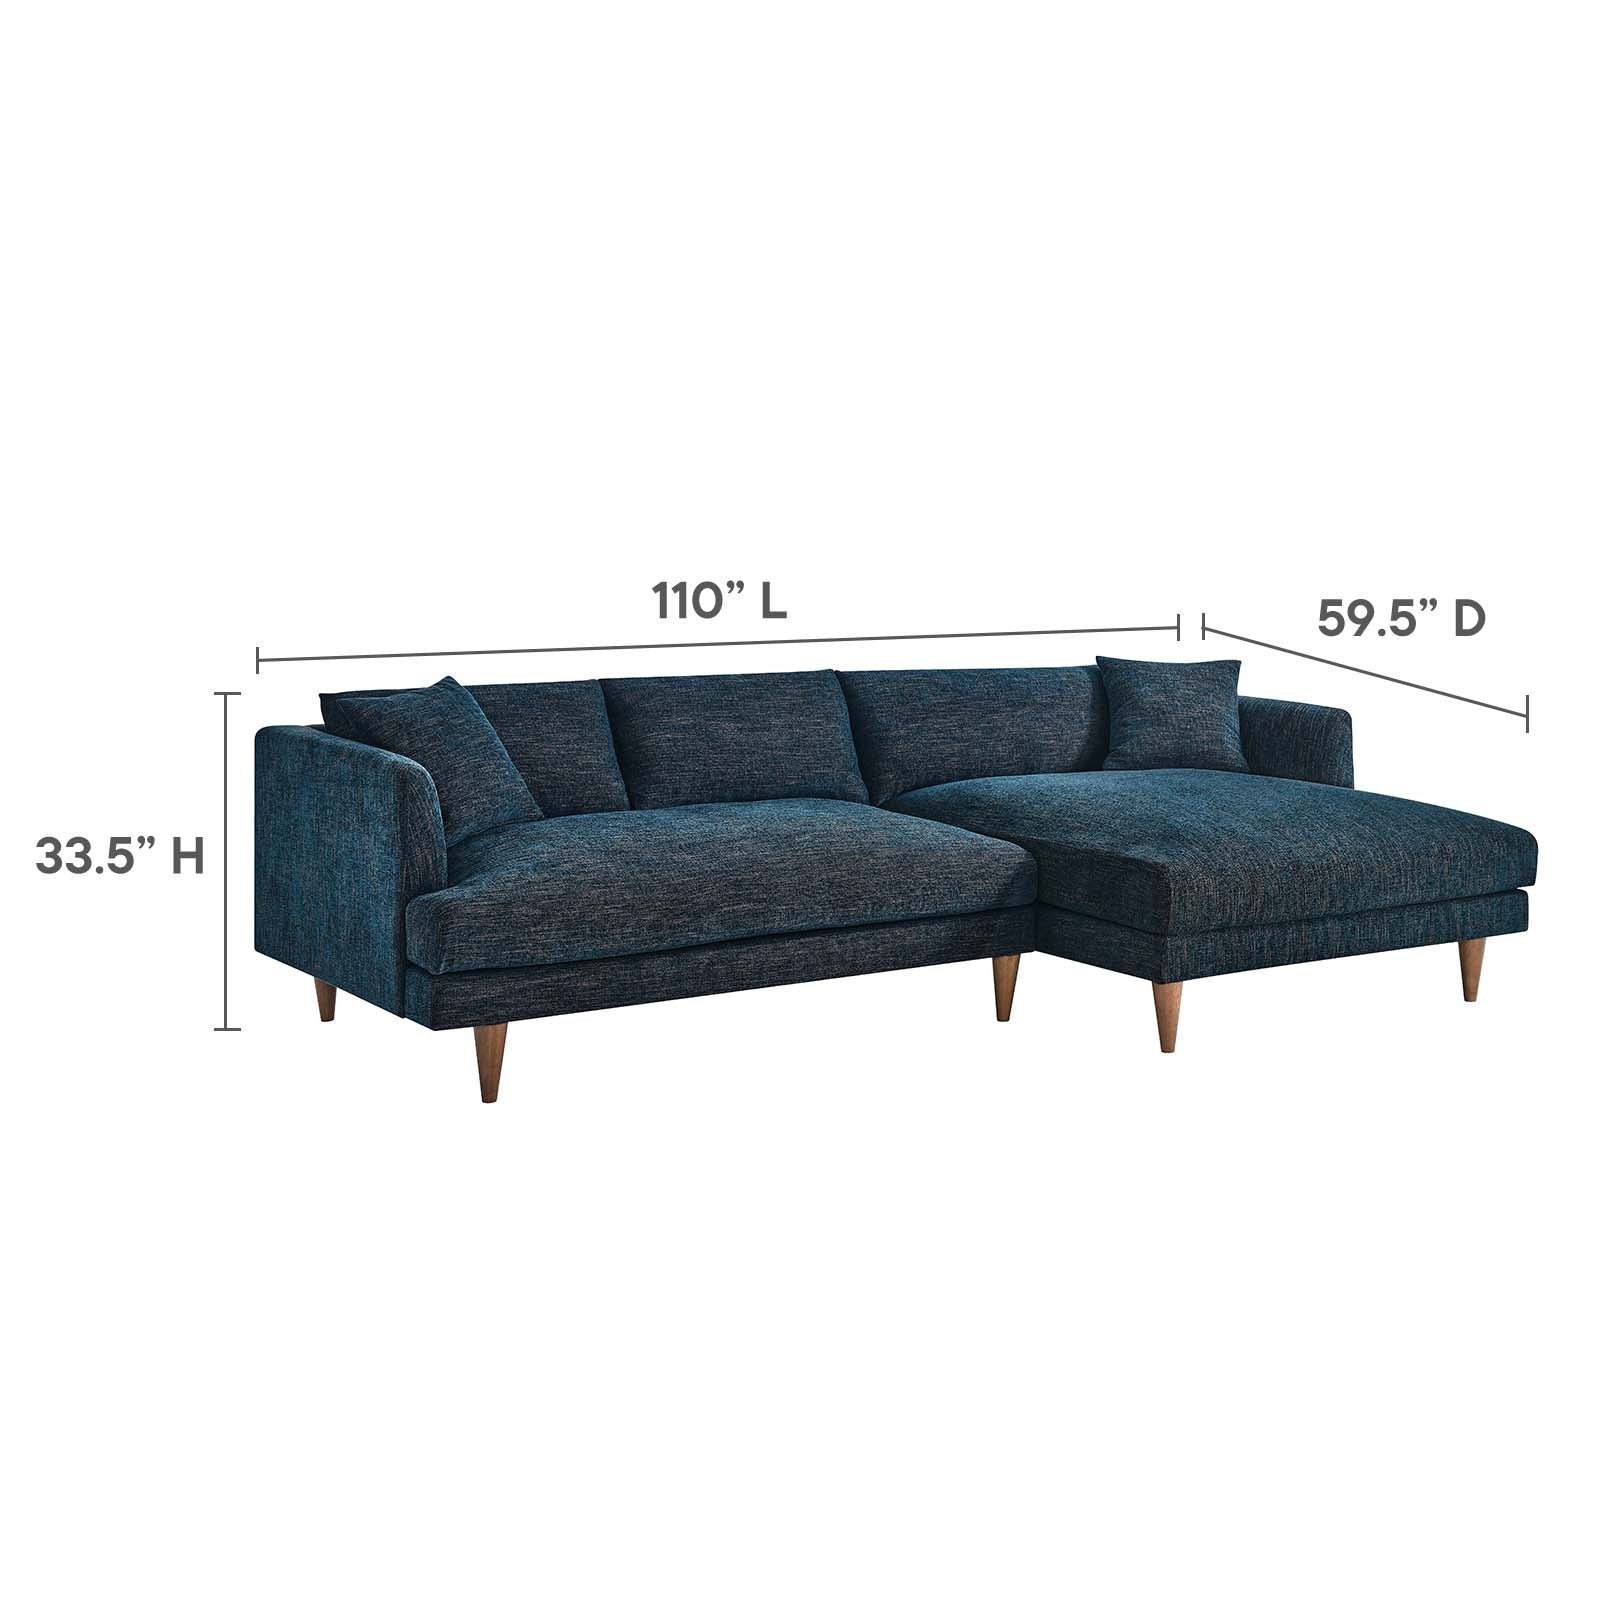 Zoya Right-Facing Down Filled Overstuffed Sectional Sofa